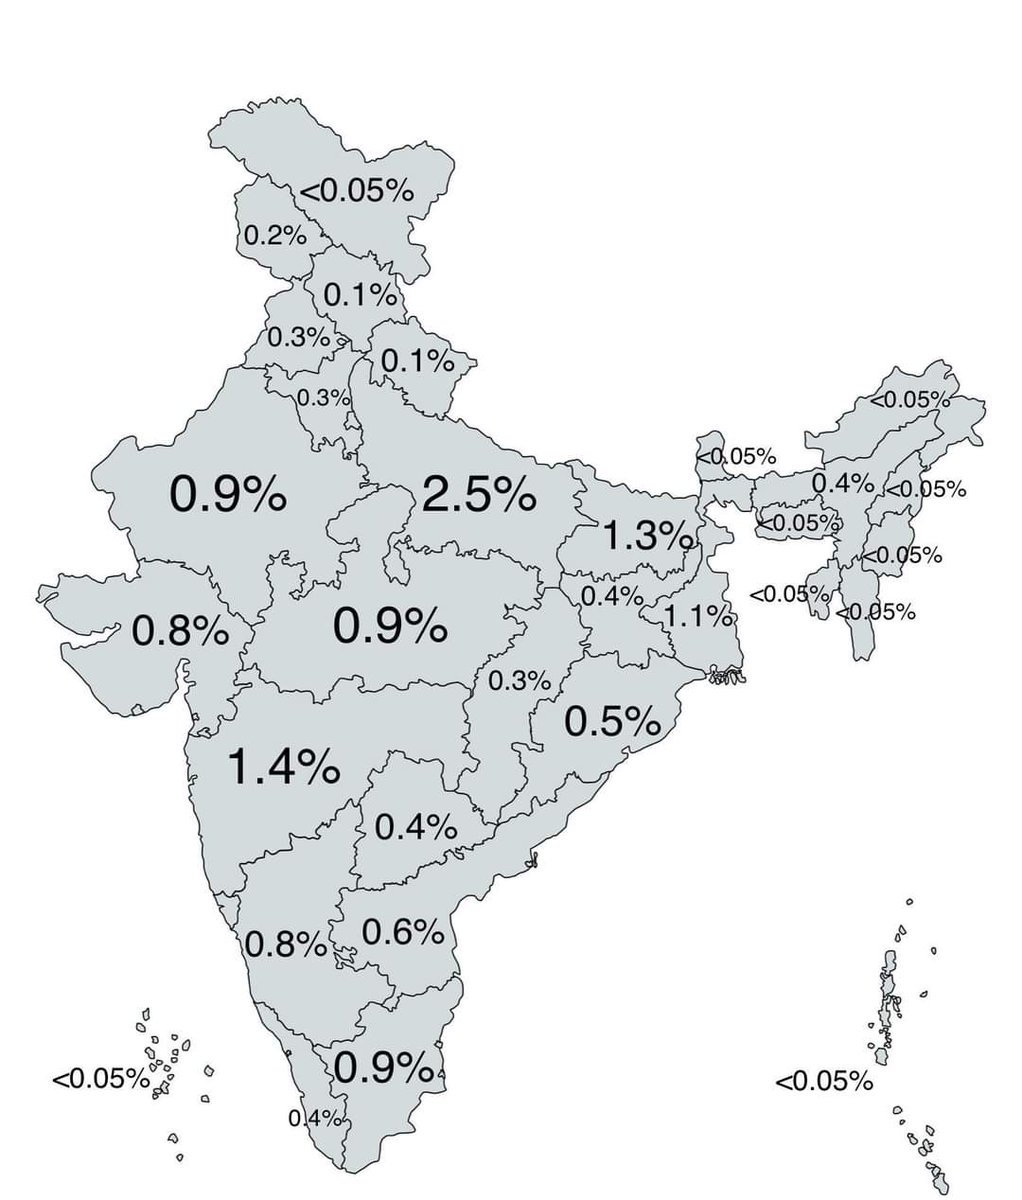 Percentage of the world's population that lives in each Indian state